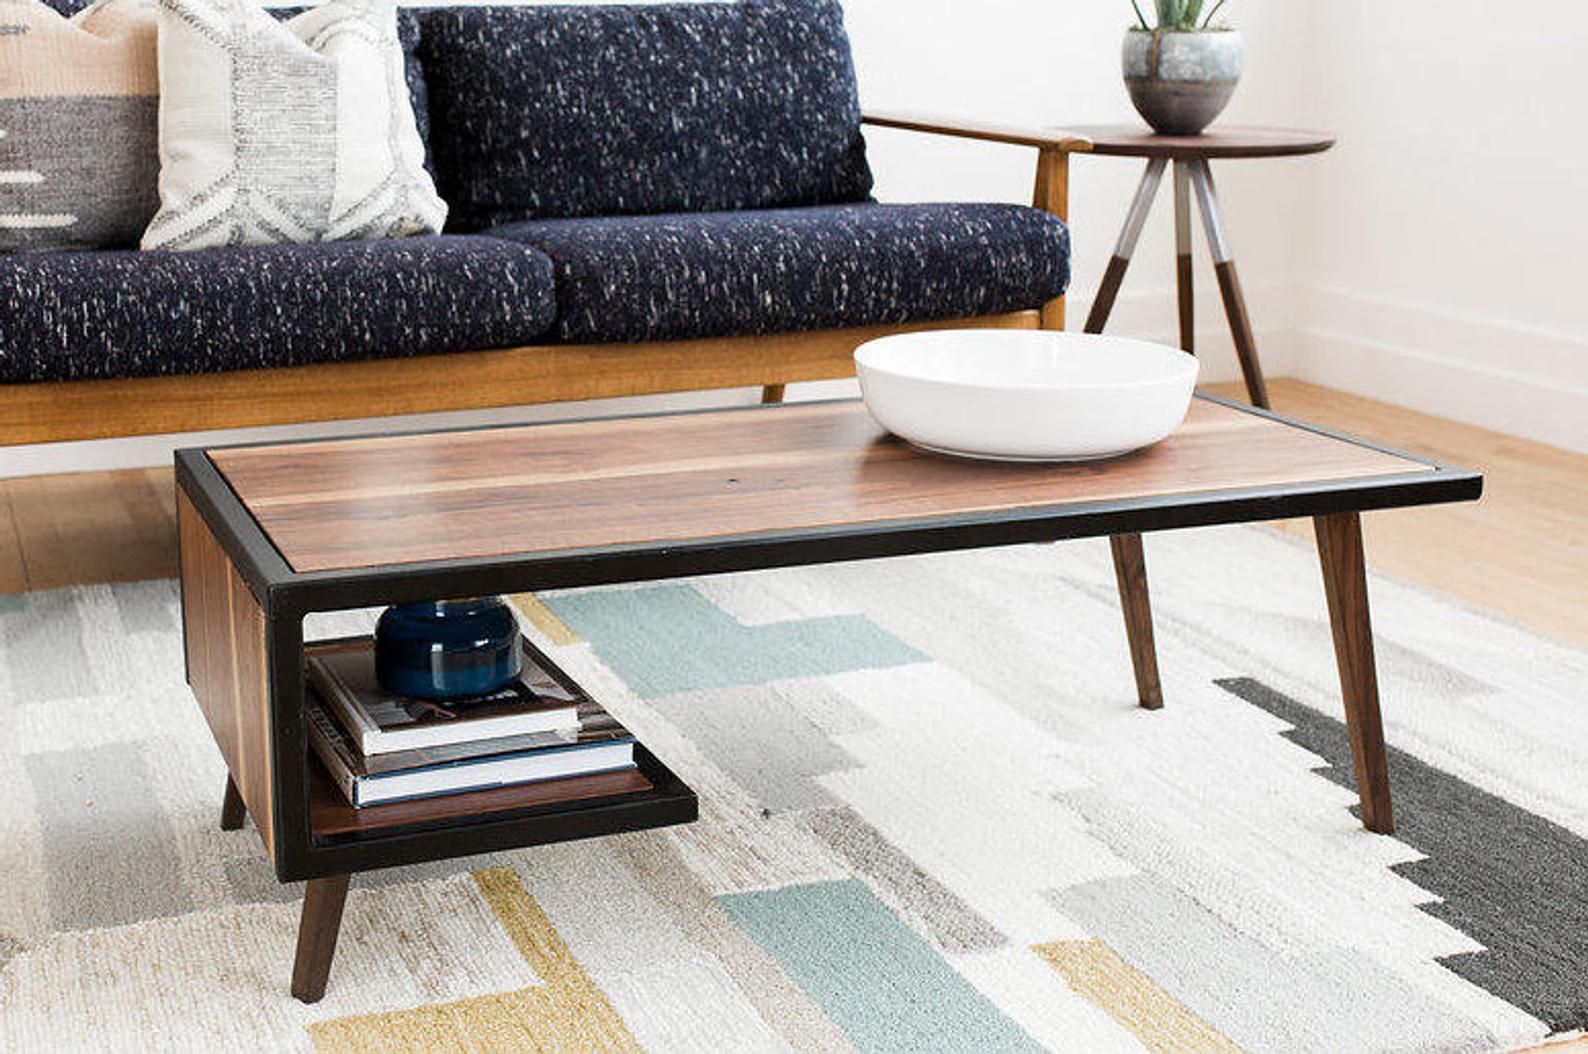 Mid Century Modern Style Coffee Tables You'll Love – Home In Mid Century Coffee Tables (View 2 of 15)